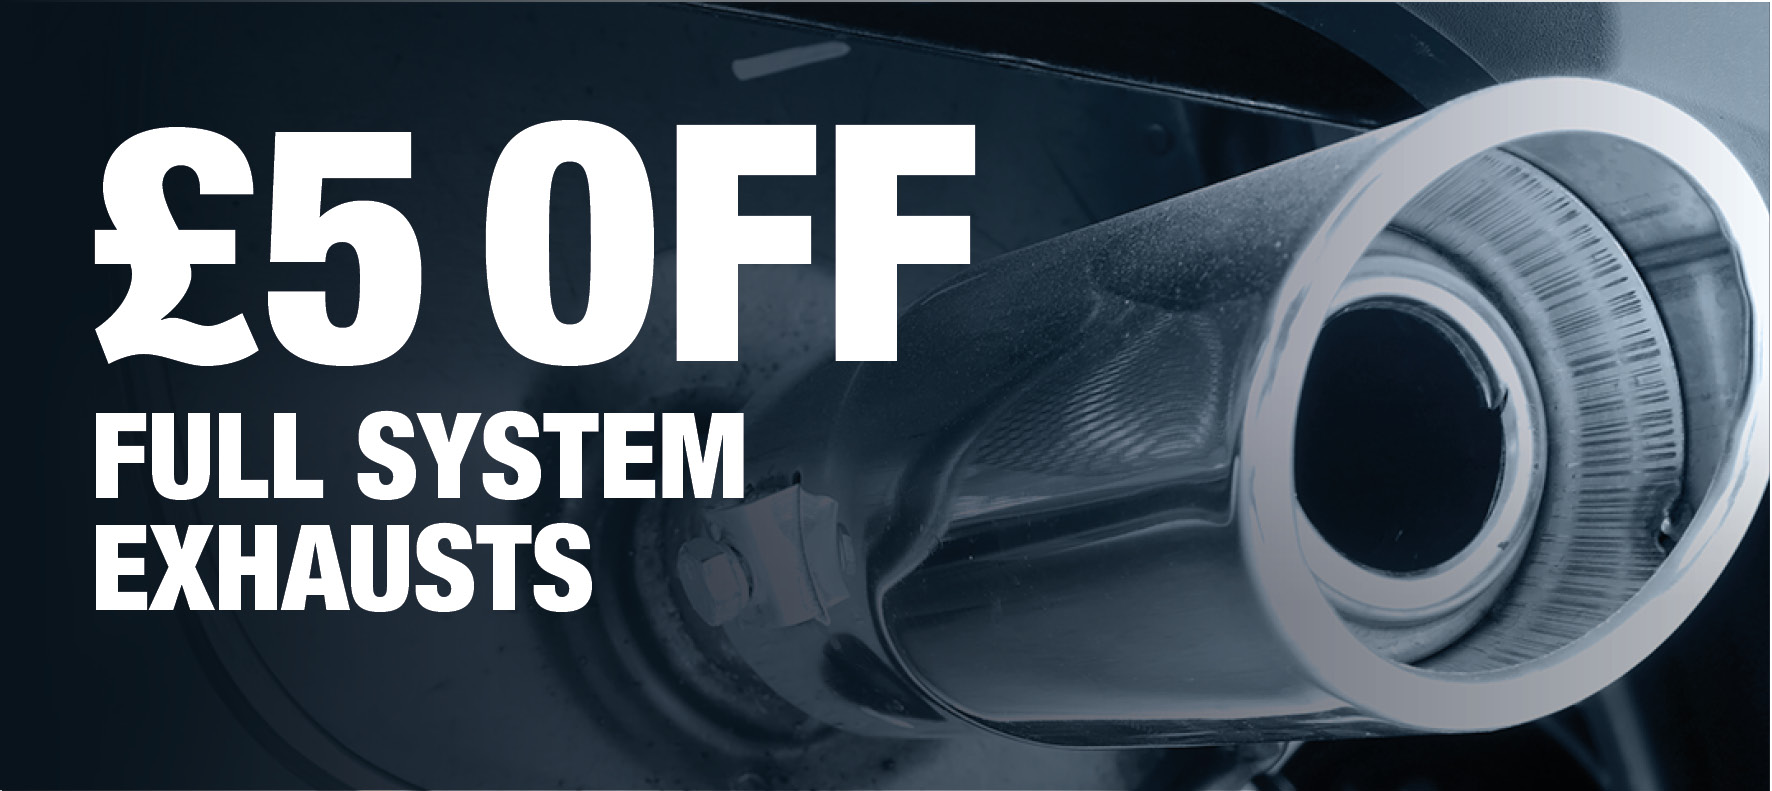 Save £5 on Full System Exhausts at Formula One Autocentres